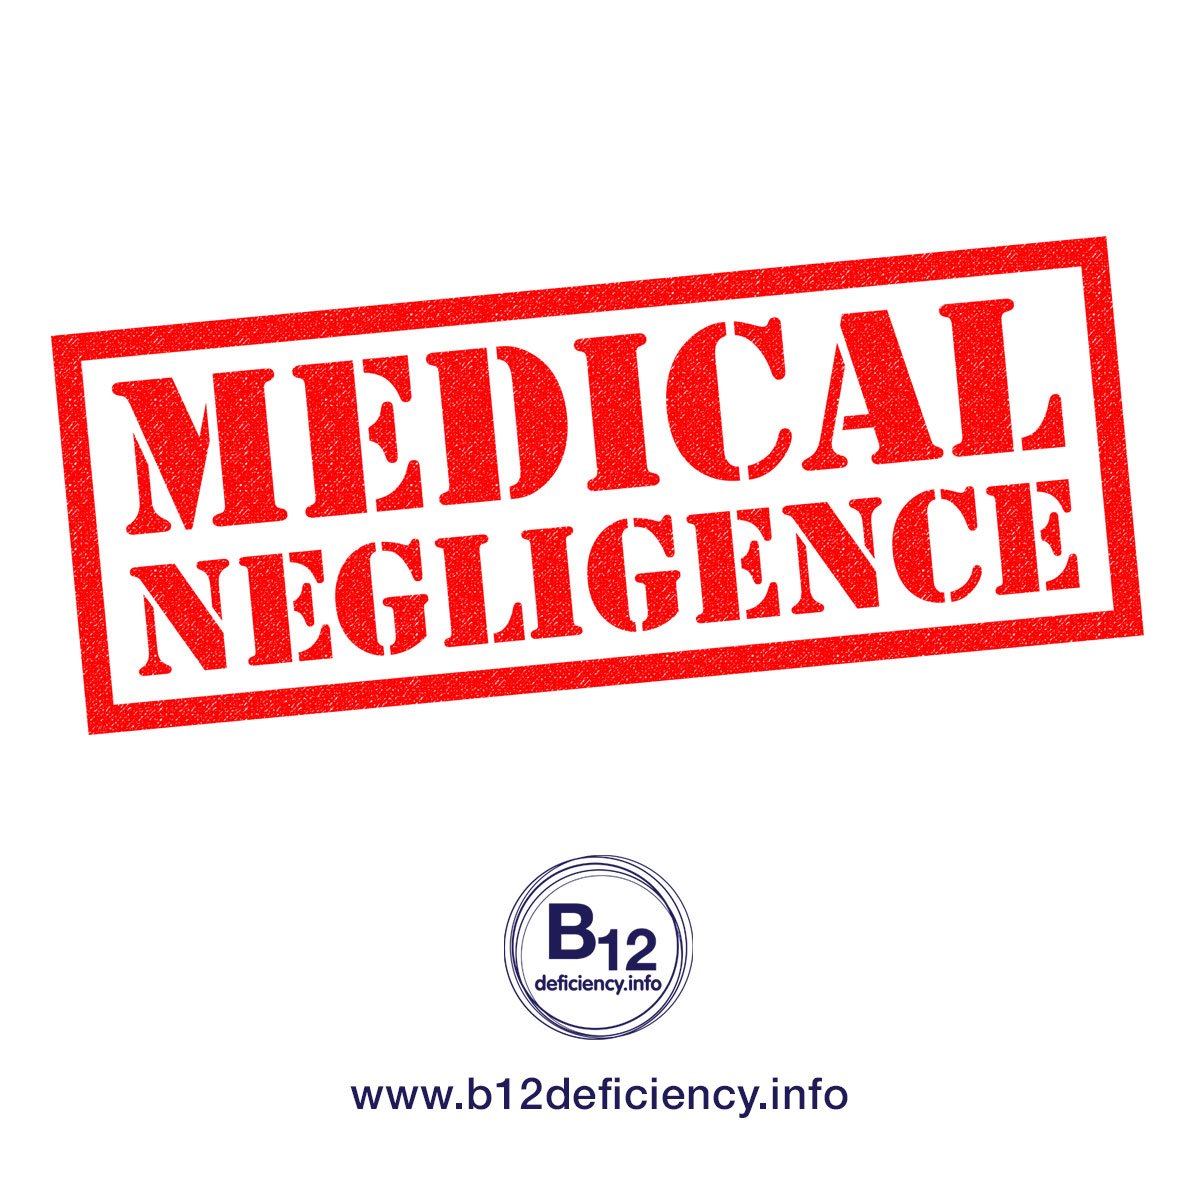 An obvious history of neglect – please help us to buy injectible B12 OTC, many doctors cannot or will not help us!